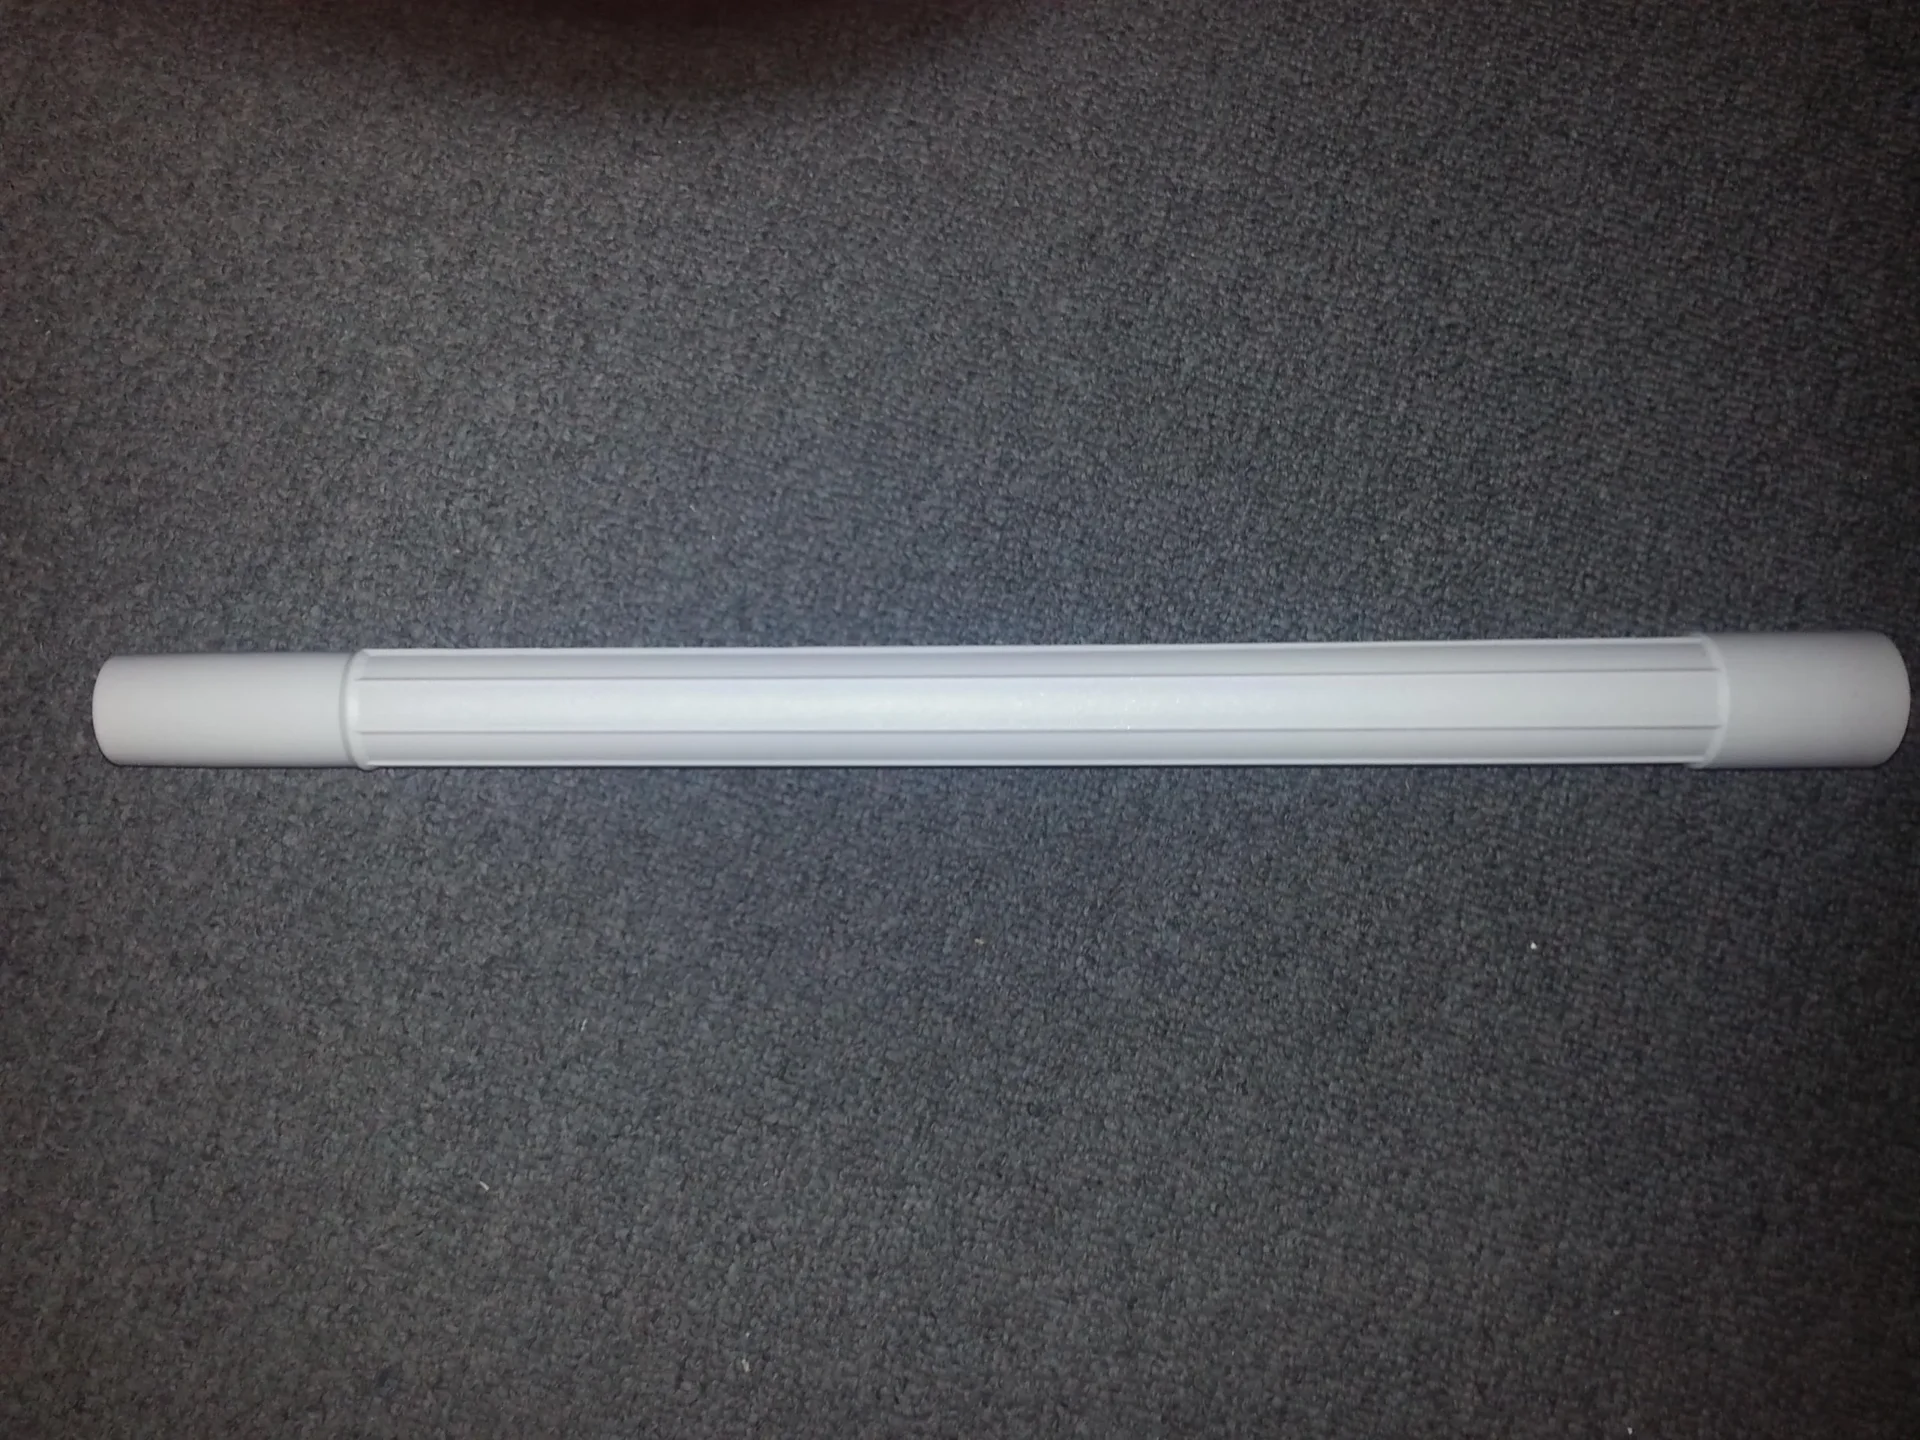 A white tube is sitting on the floor.